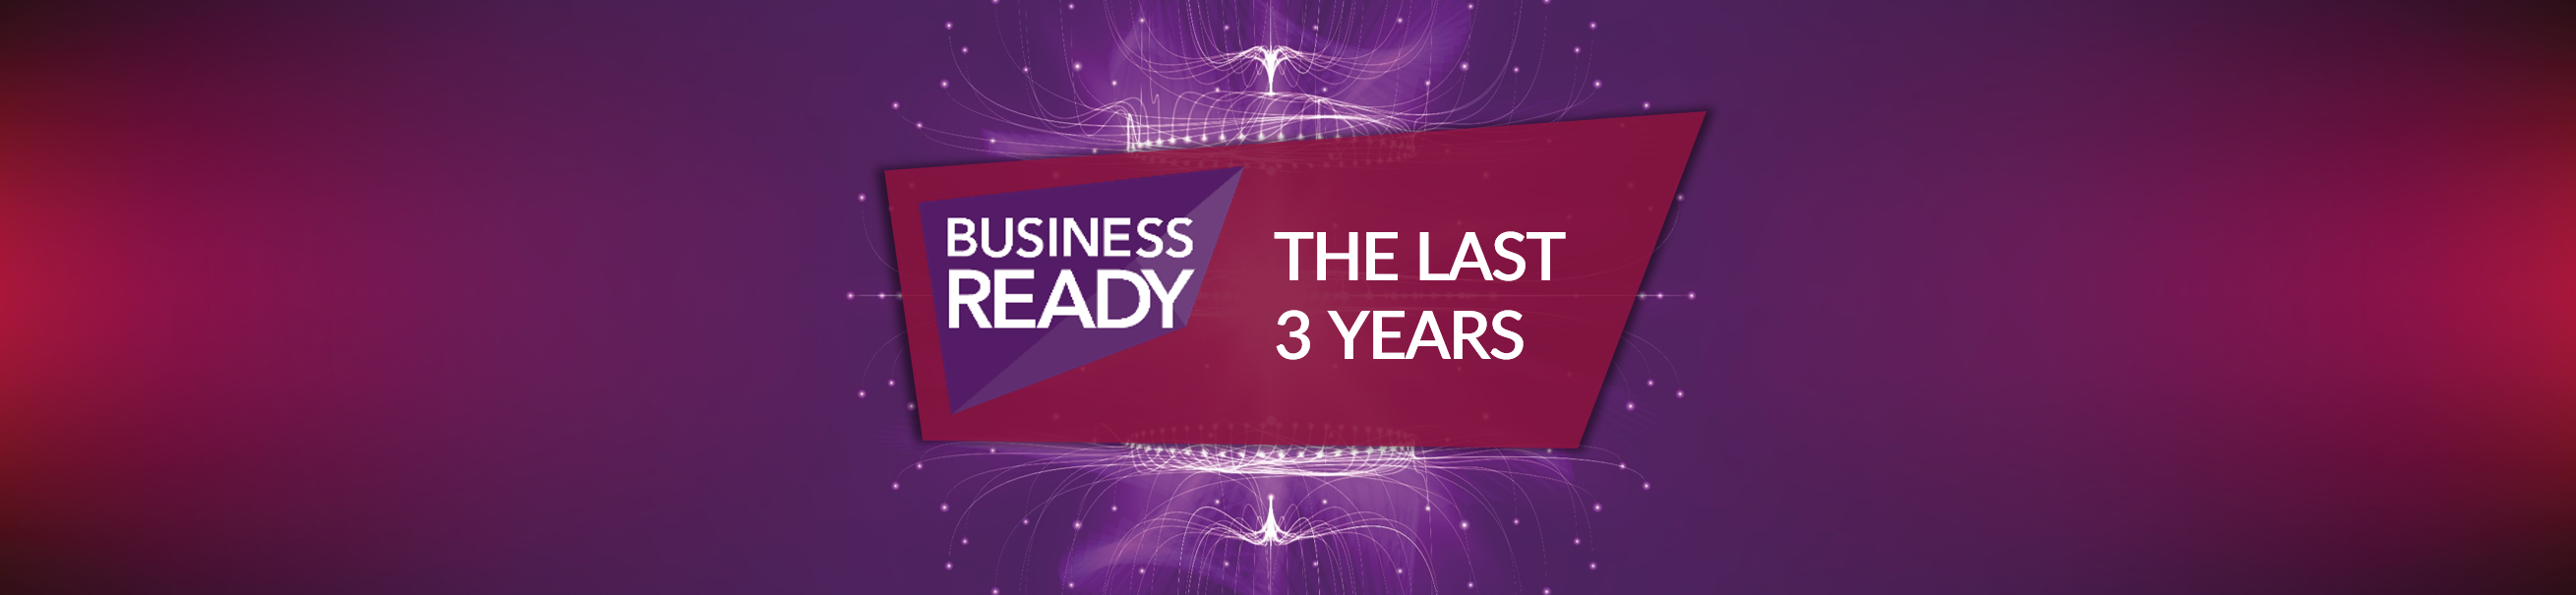 Business Ready – The last 3 years